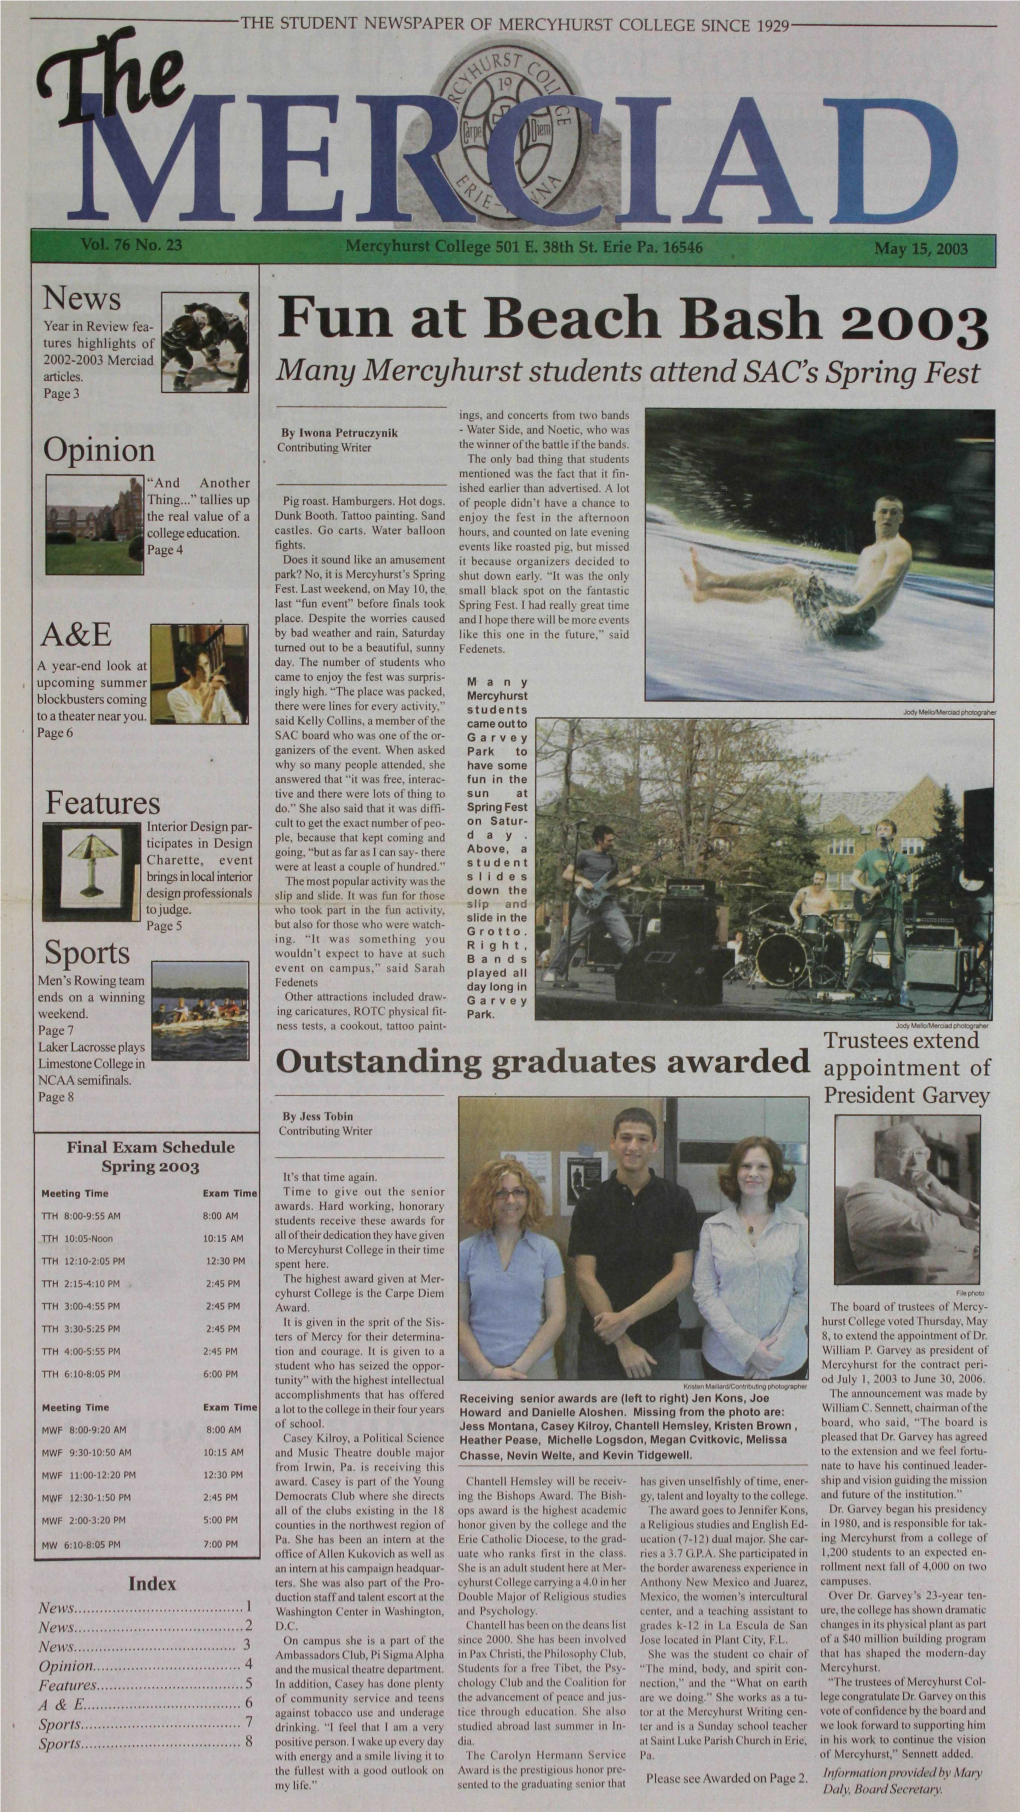 The Student Newspaper of Mercyhurst College Since 1929